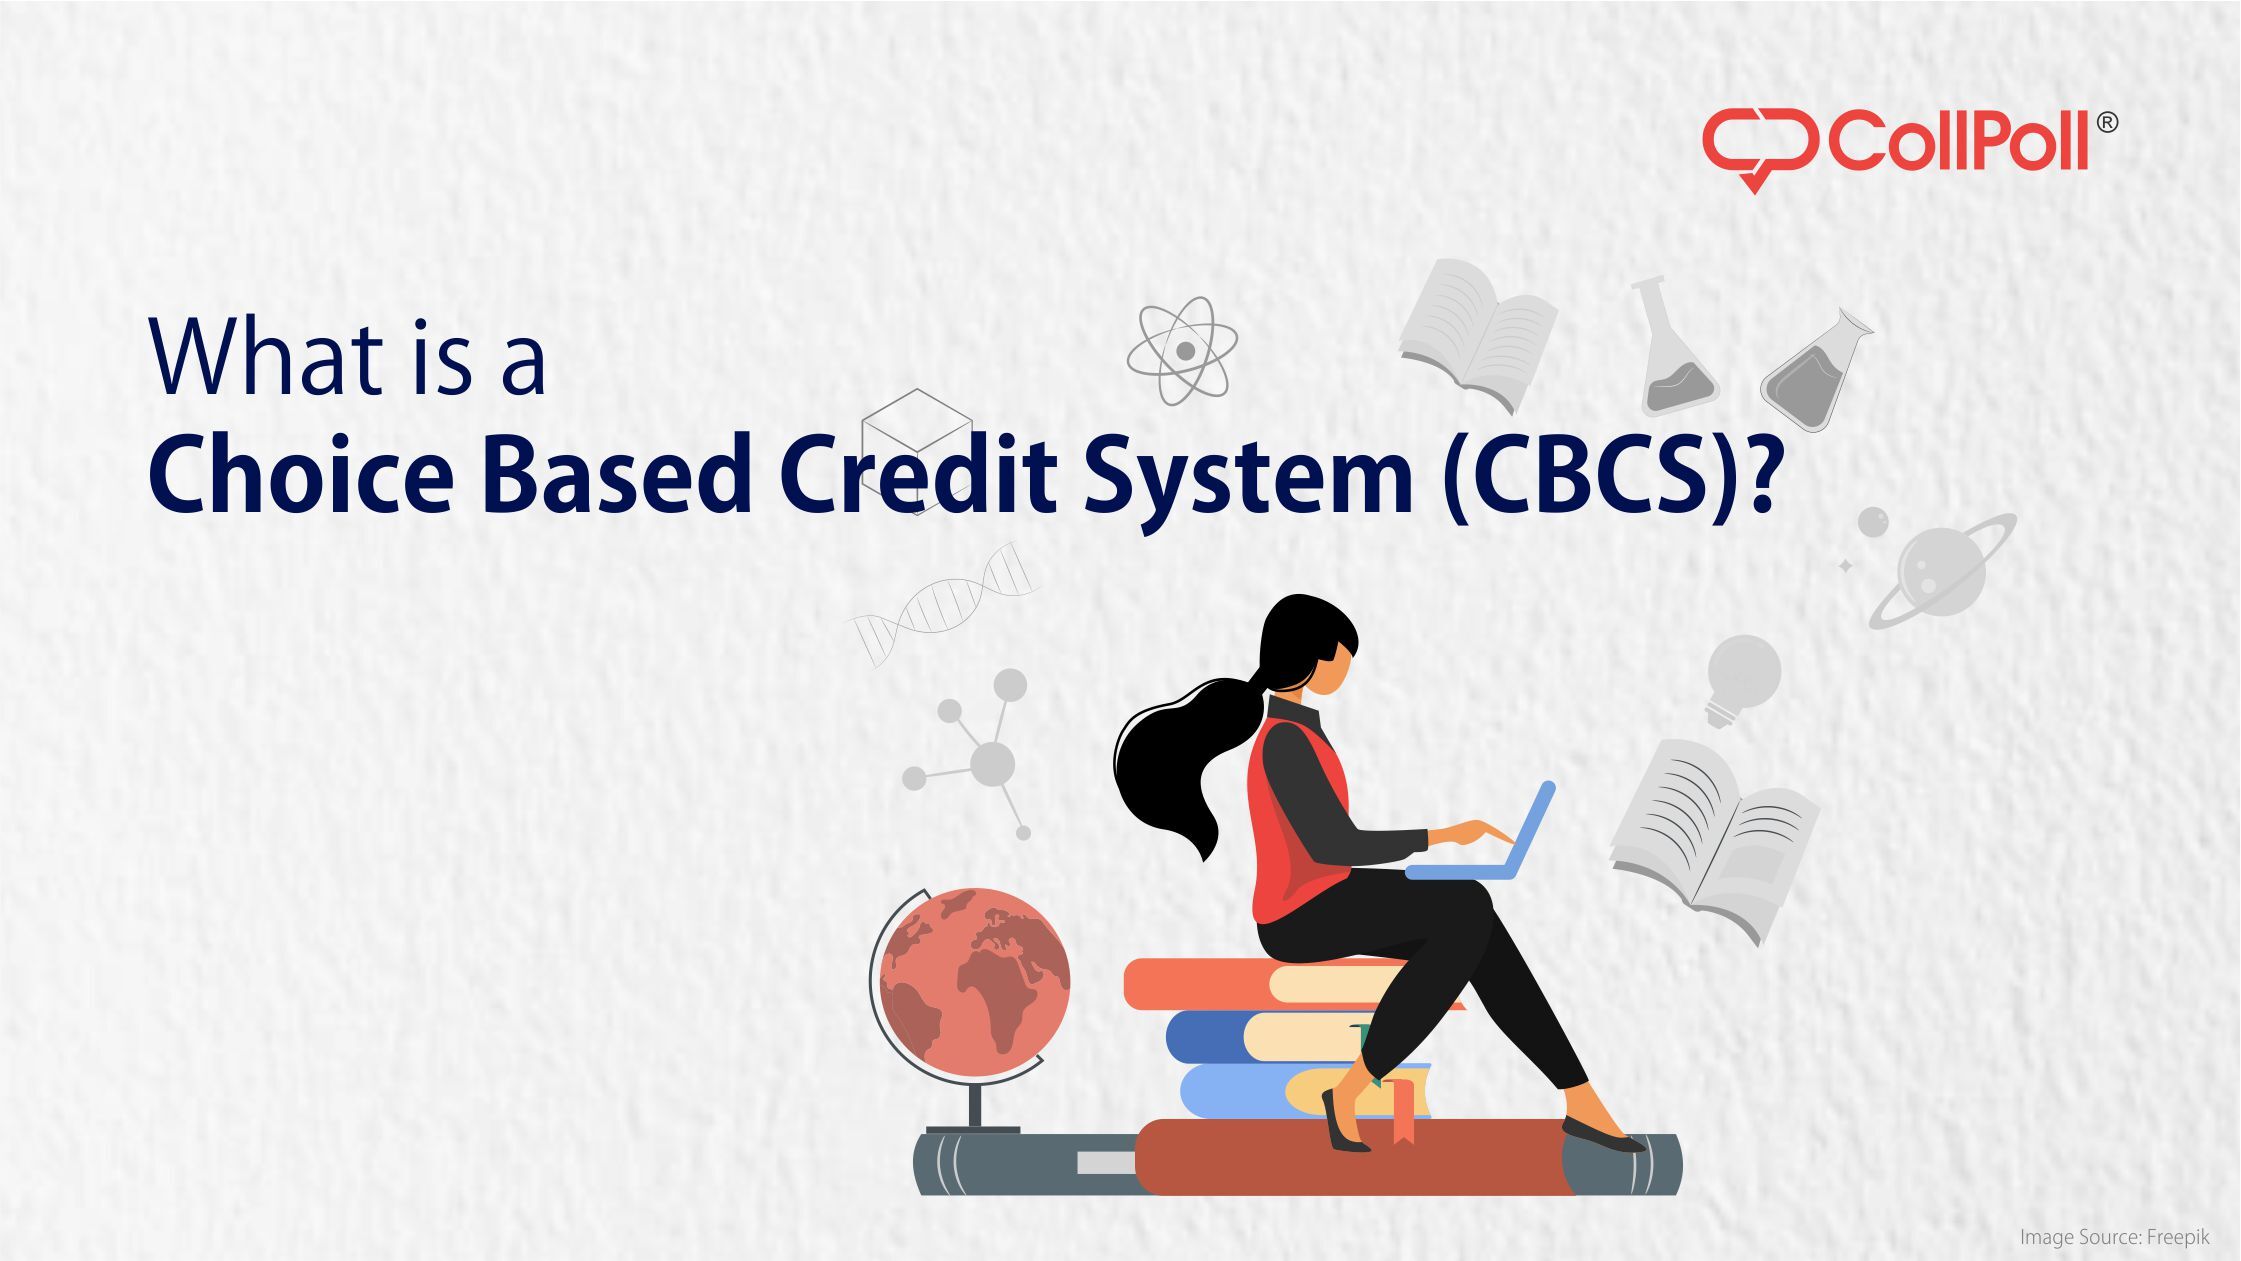 What is a Choice Based Credit System (CBCS)